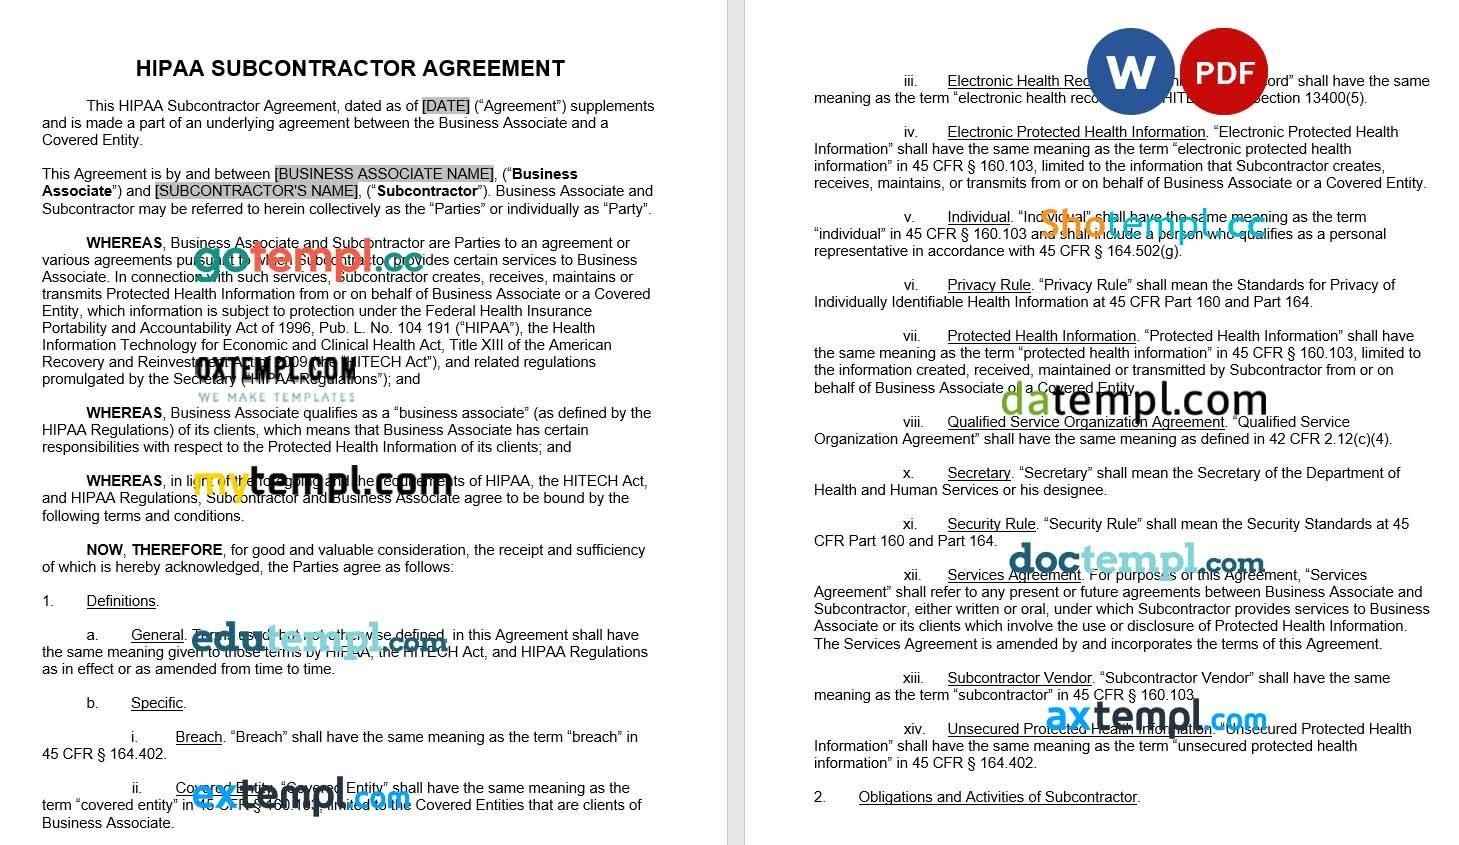 HIPAA Subcontractor Agreement Word example, fully editable